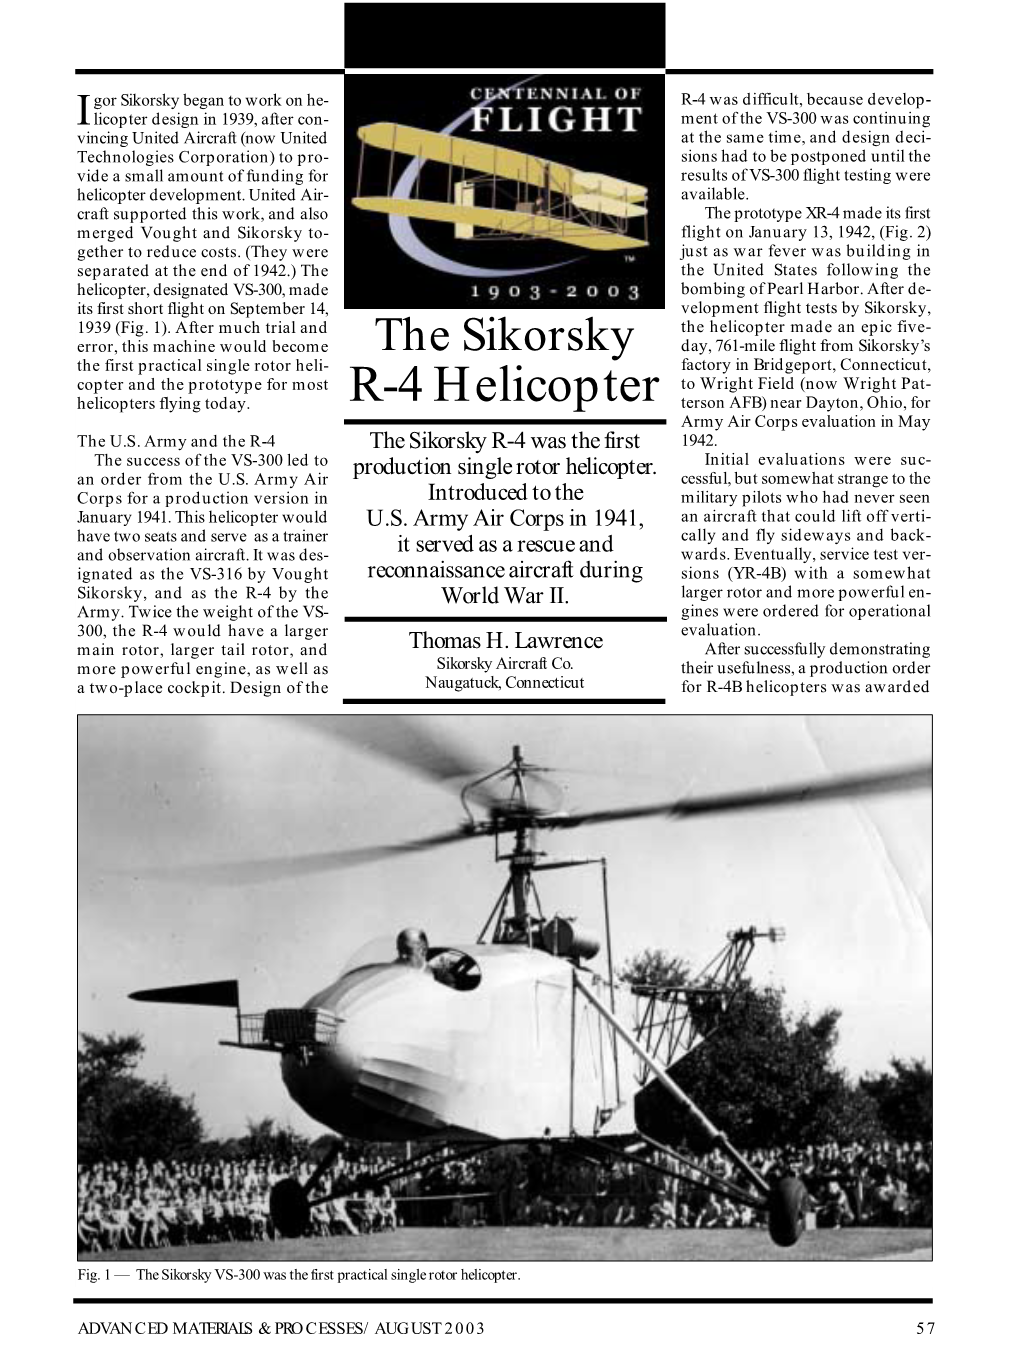 R-4 Helicopter Terson AFB) Near Dayton, Ohio, for Army Air Corps Evaluation in May the U.S